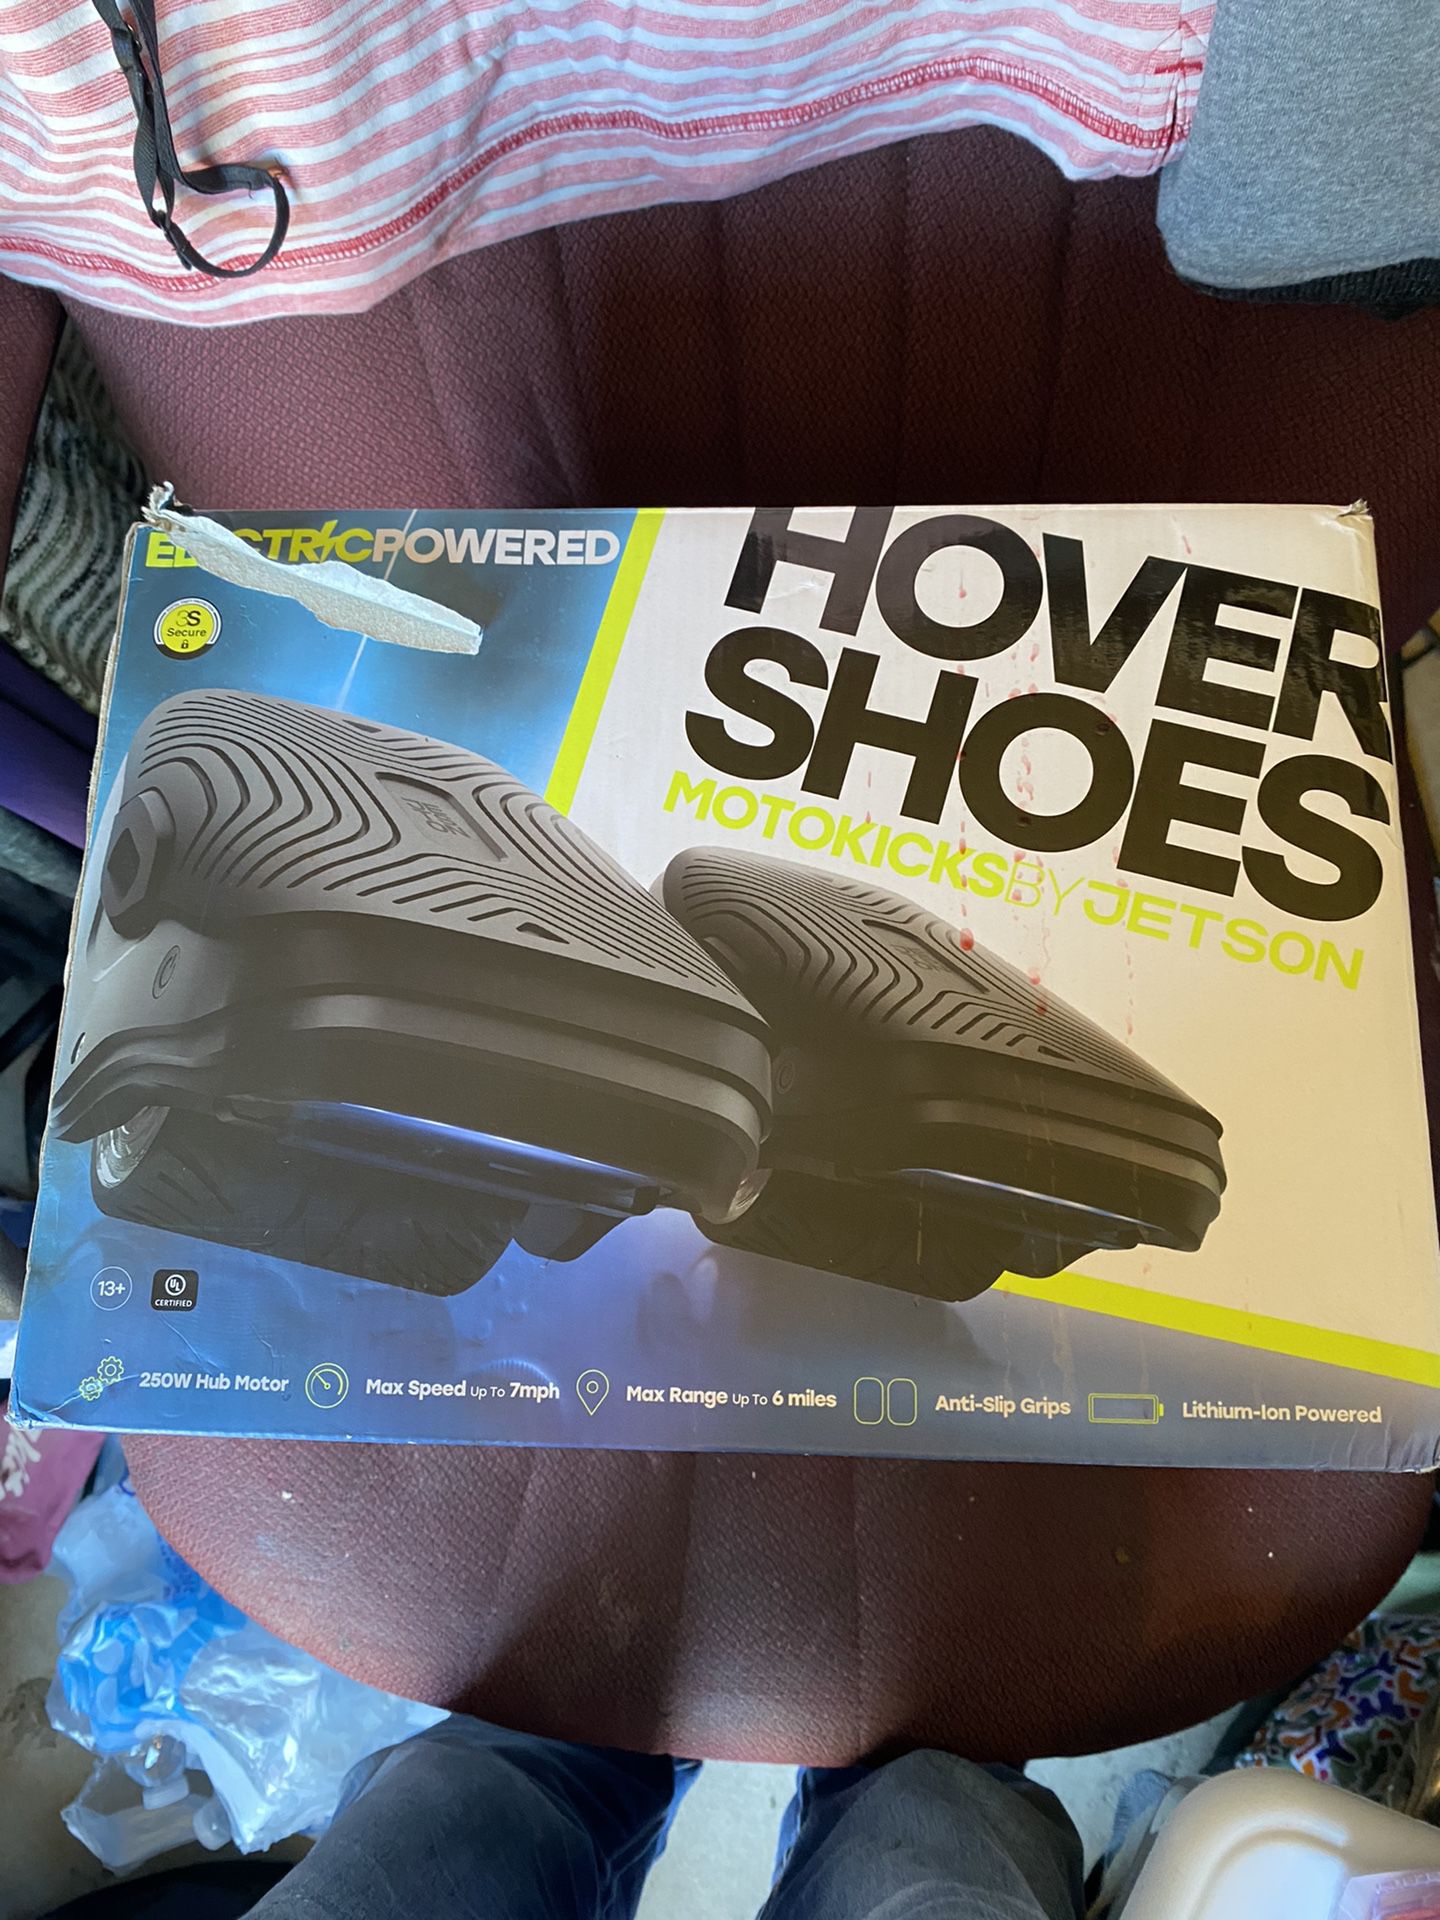 Hover Shoes by Jetson “So much Fun”